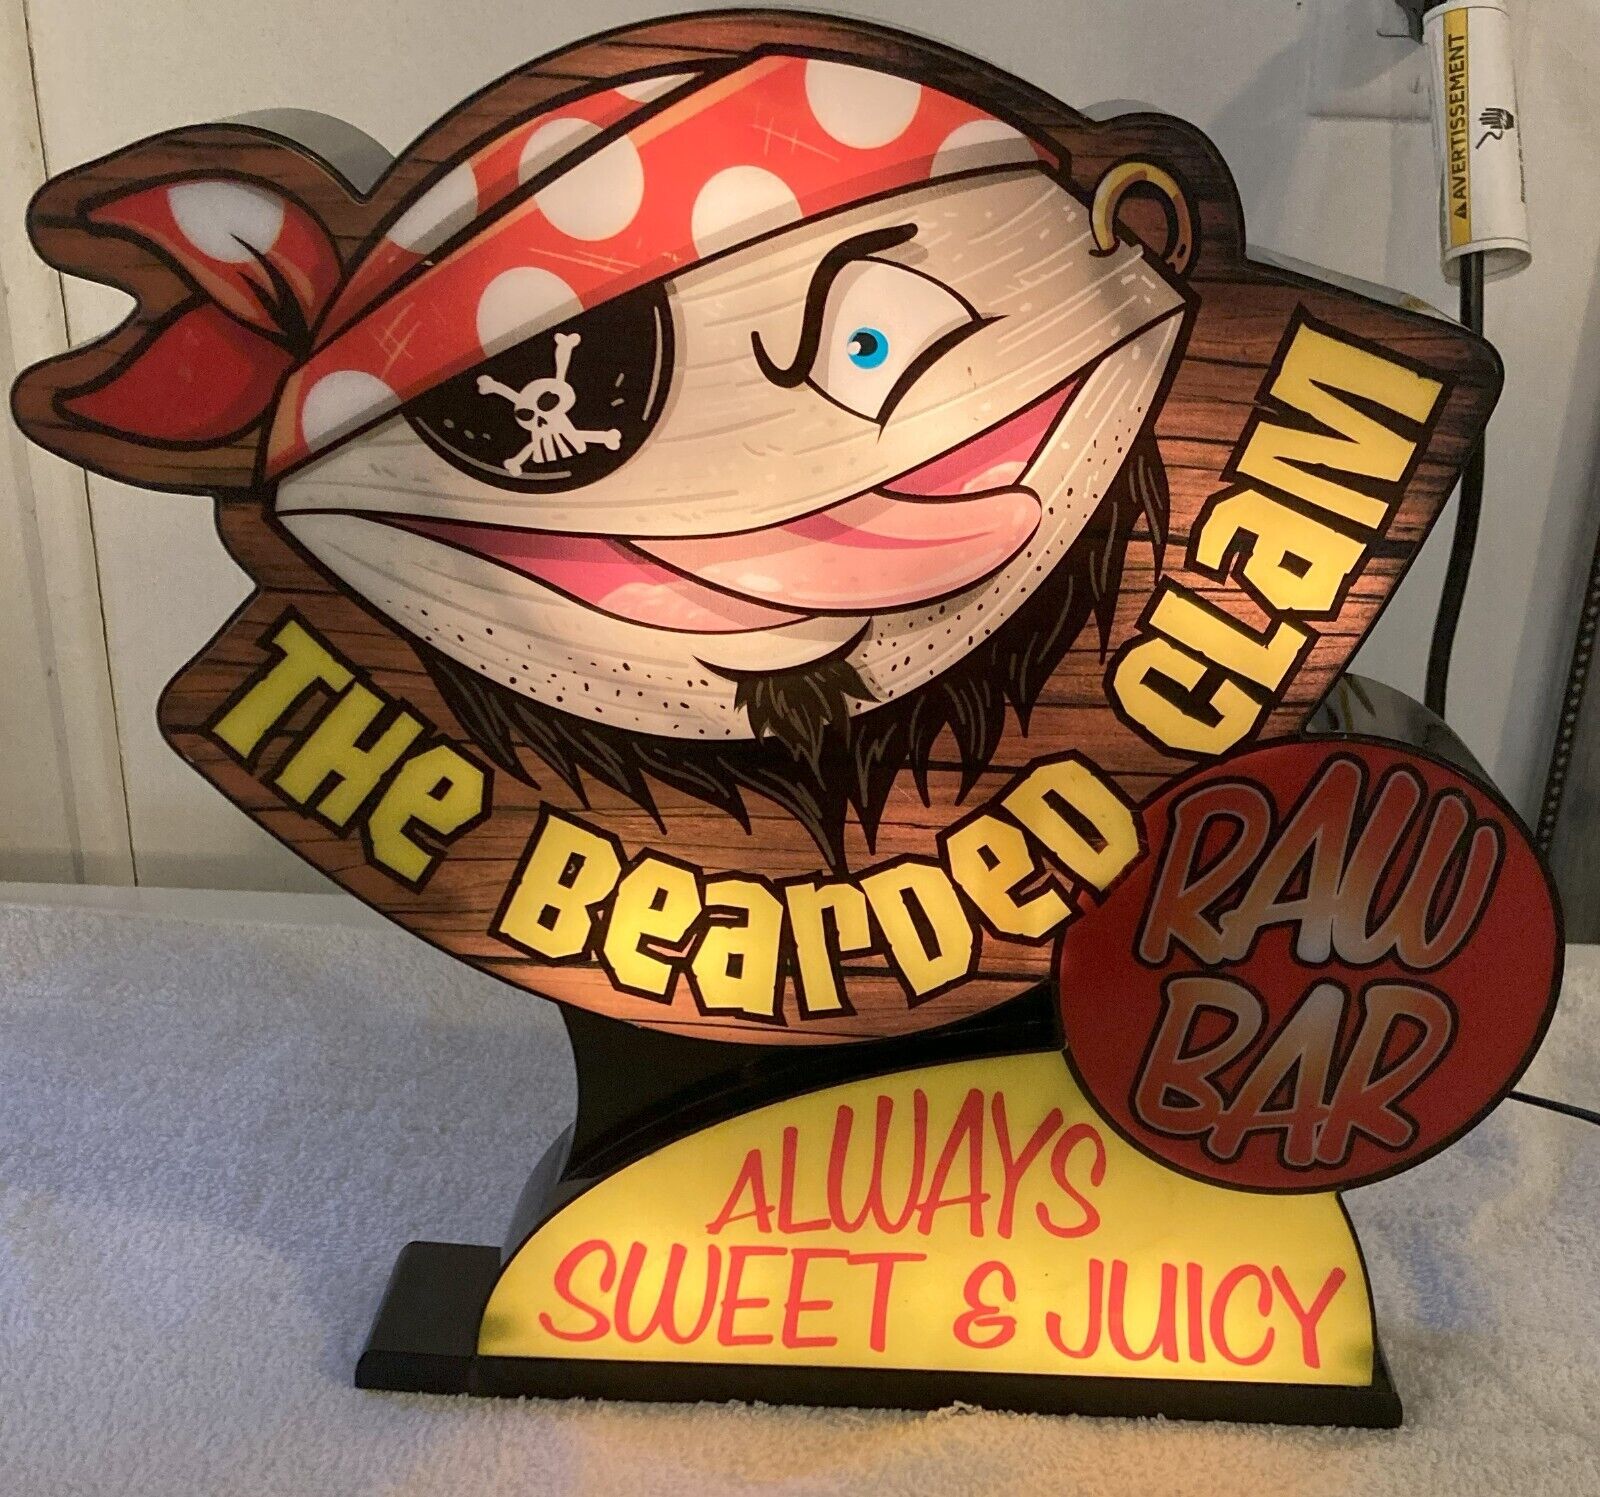 Bearded Clam Bar Lighted Sign Raw Bar Always Sweet & Juicy-WORKS GREAT & FLASHES